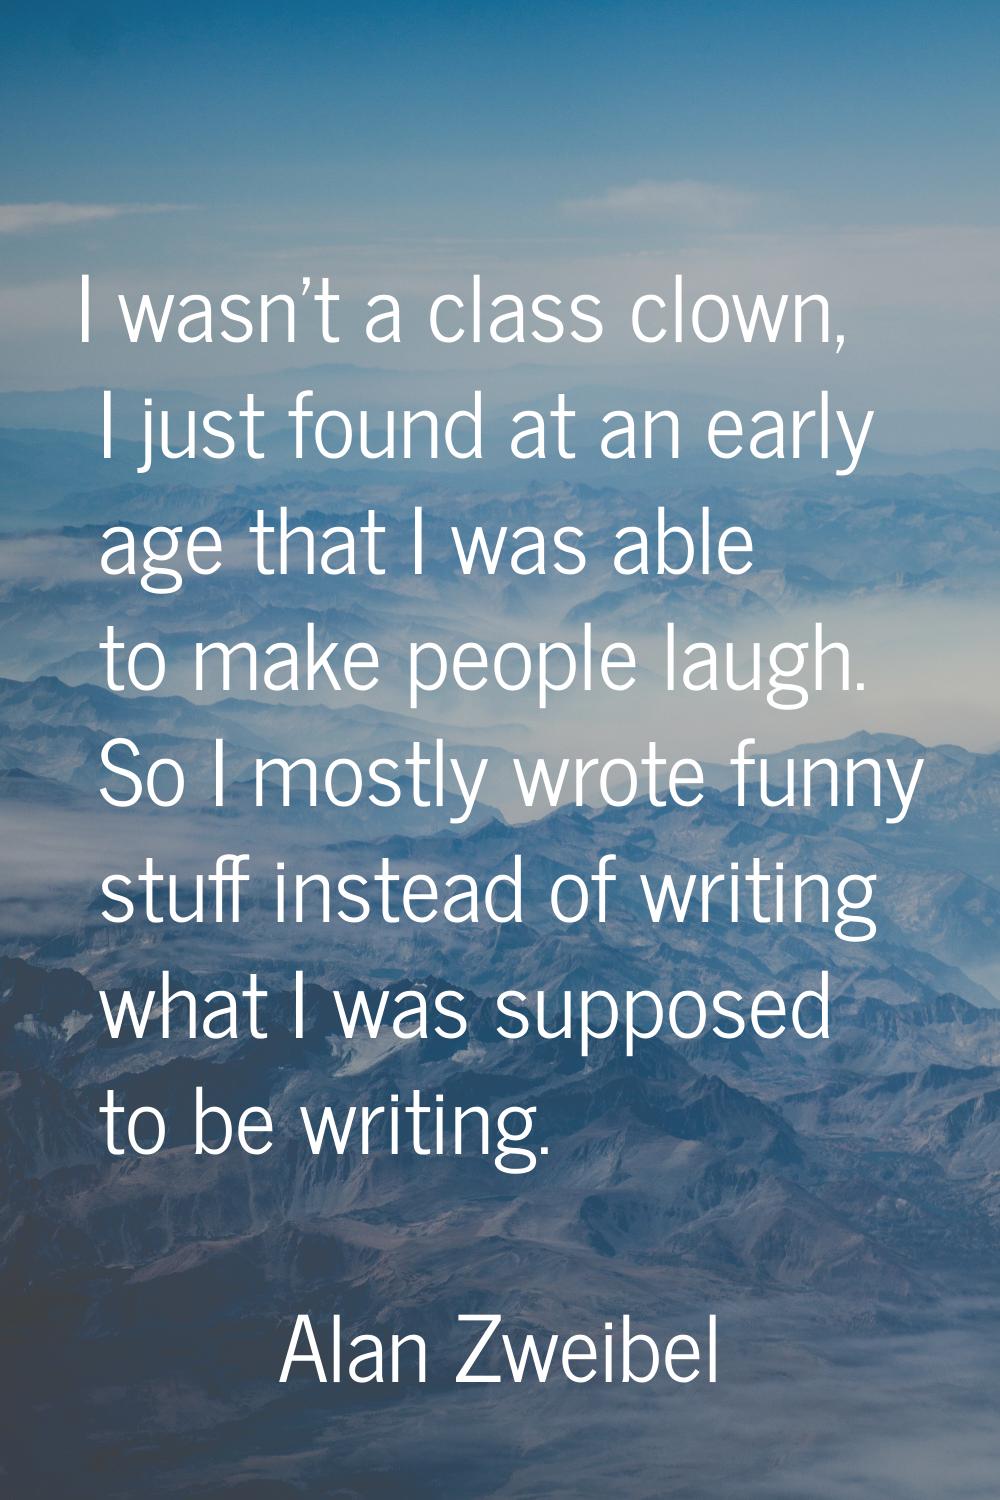 I wasn't a class clown, I just found at an early age that I was able to make people laugh. So I mos